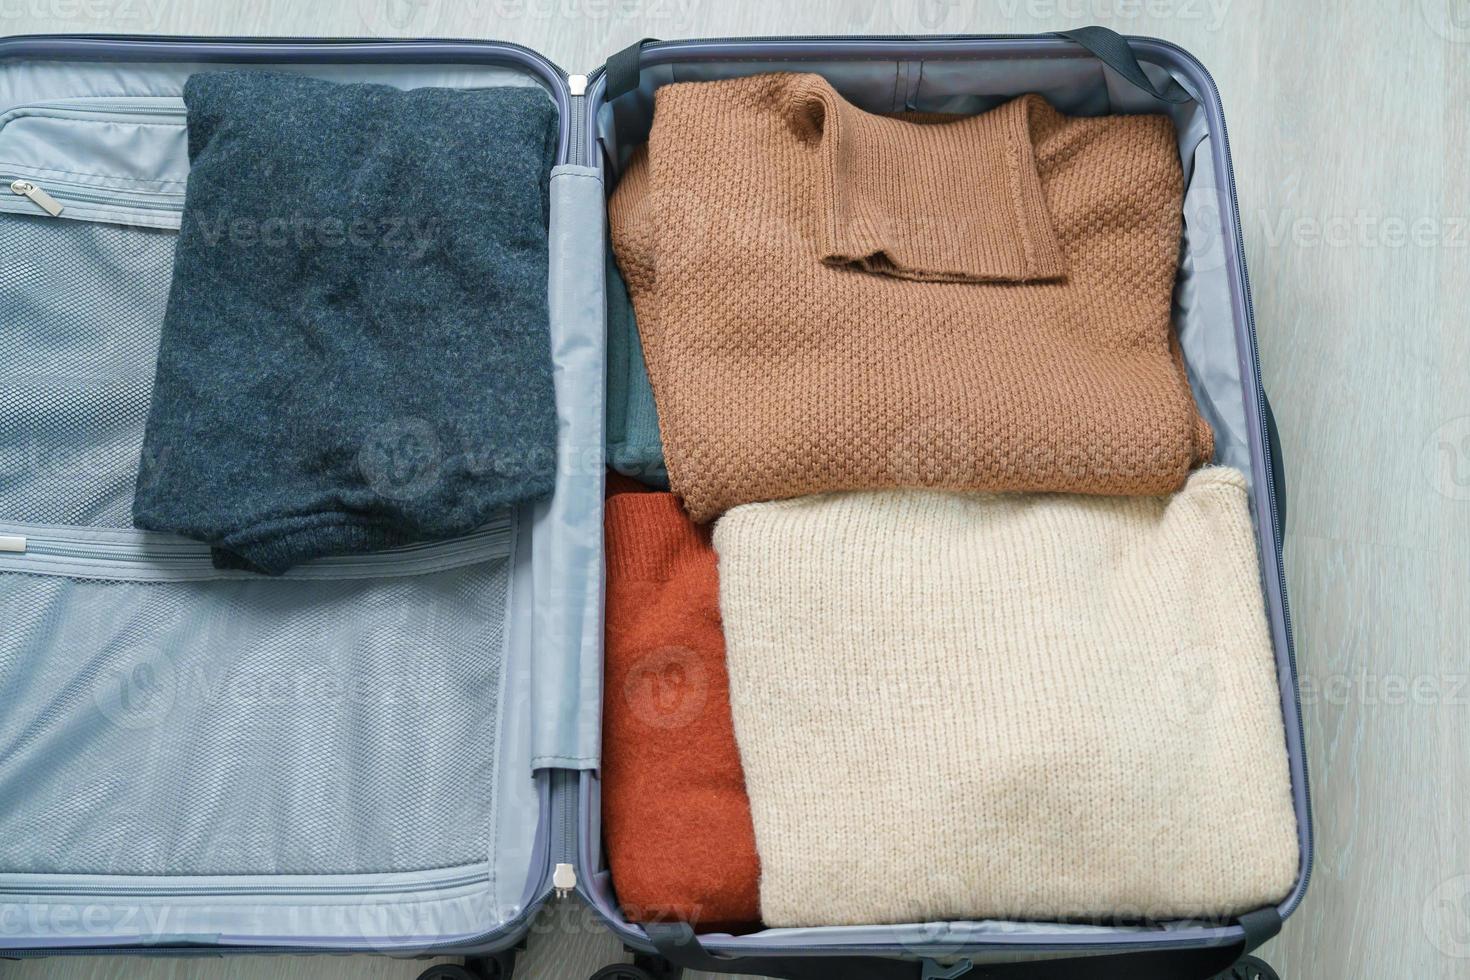 winter clothes in luggage. Time to travel, trip, Relax, spring or autumn or winter season and vacation concepts photo